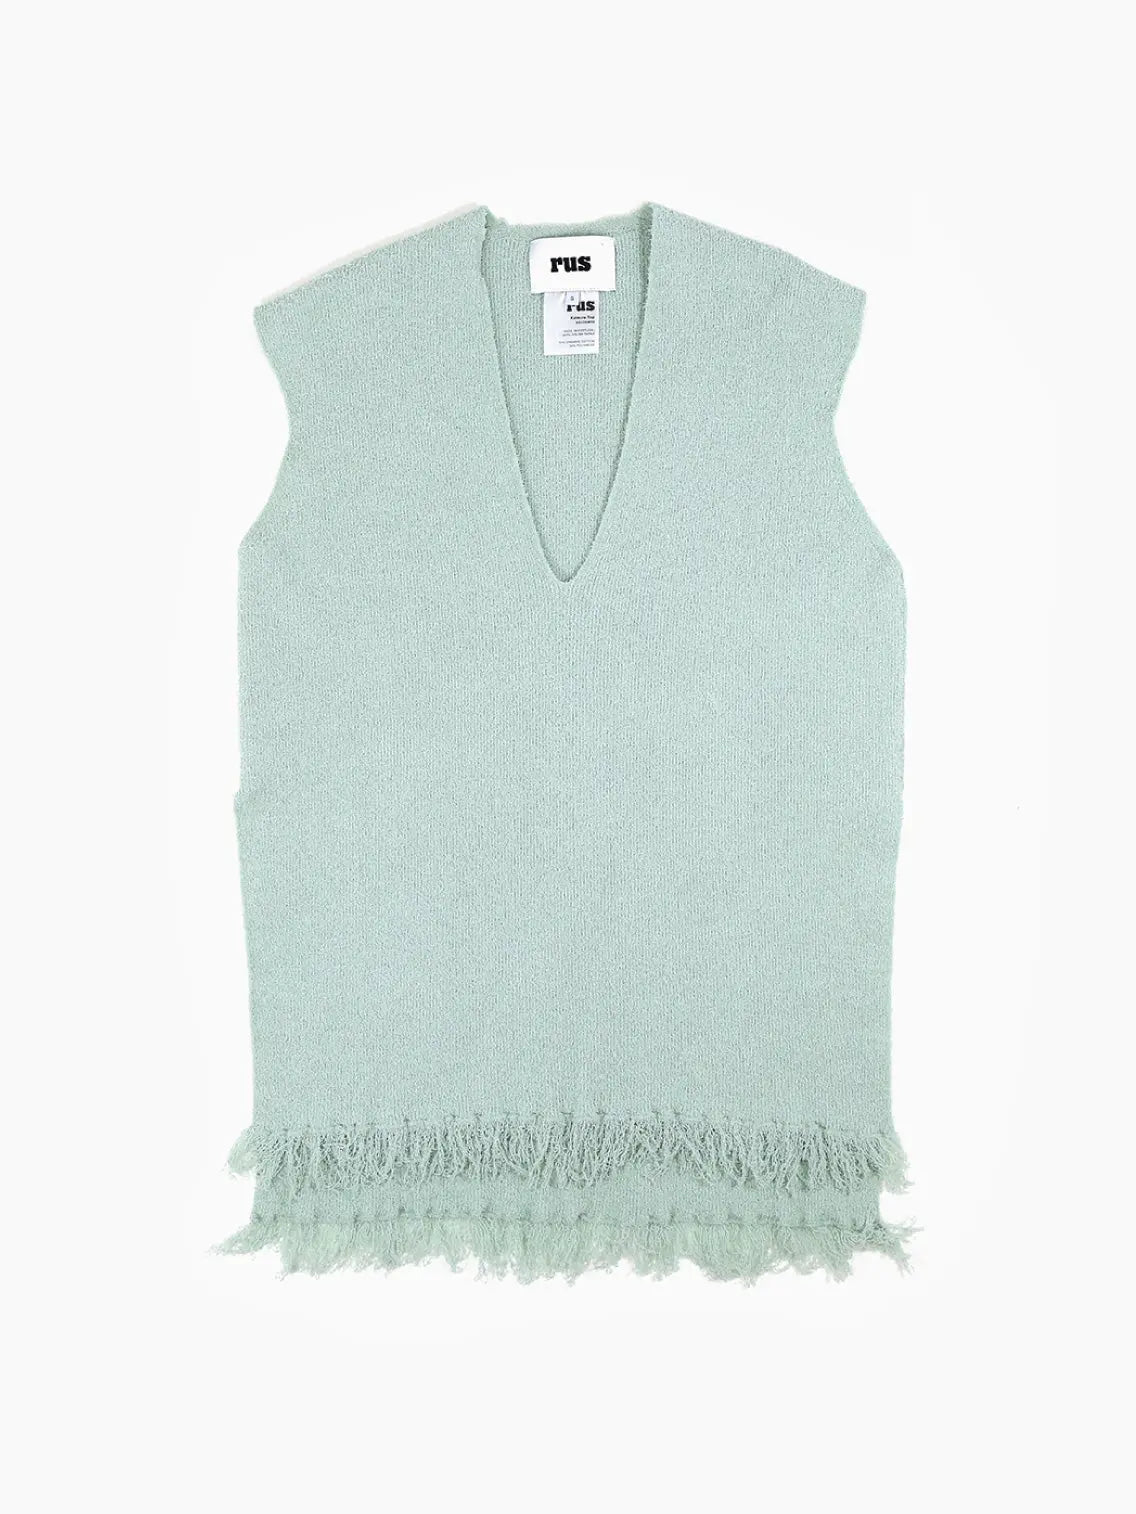 A Katsura Top Green with a deep V-neck and a fringe trim at the hem. The label inside the collar area reads "Rus," and additional garment care and size tags are visible underneath. This chic piece, available at BassalStore in Barcelona, is laid flat against a plain white background.